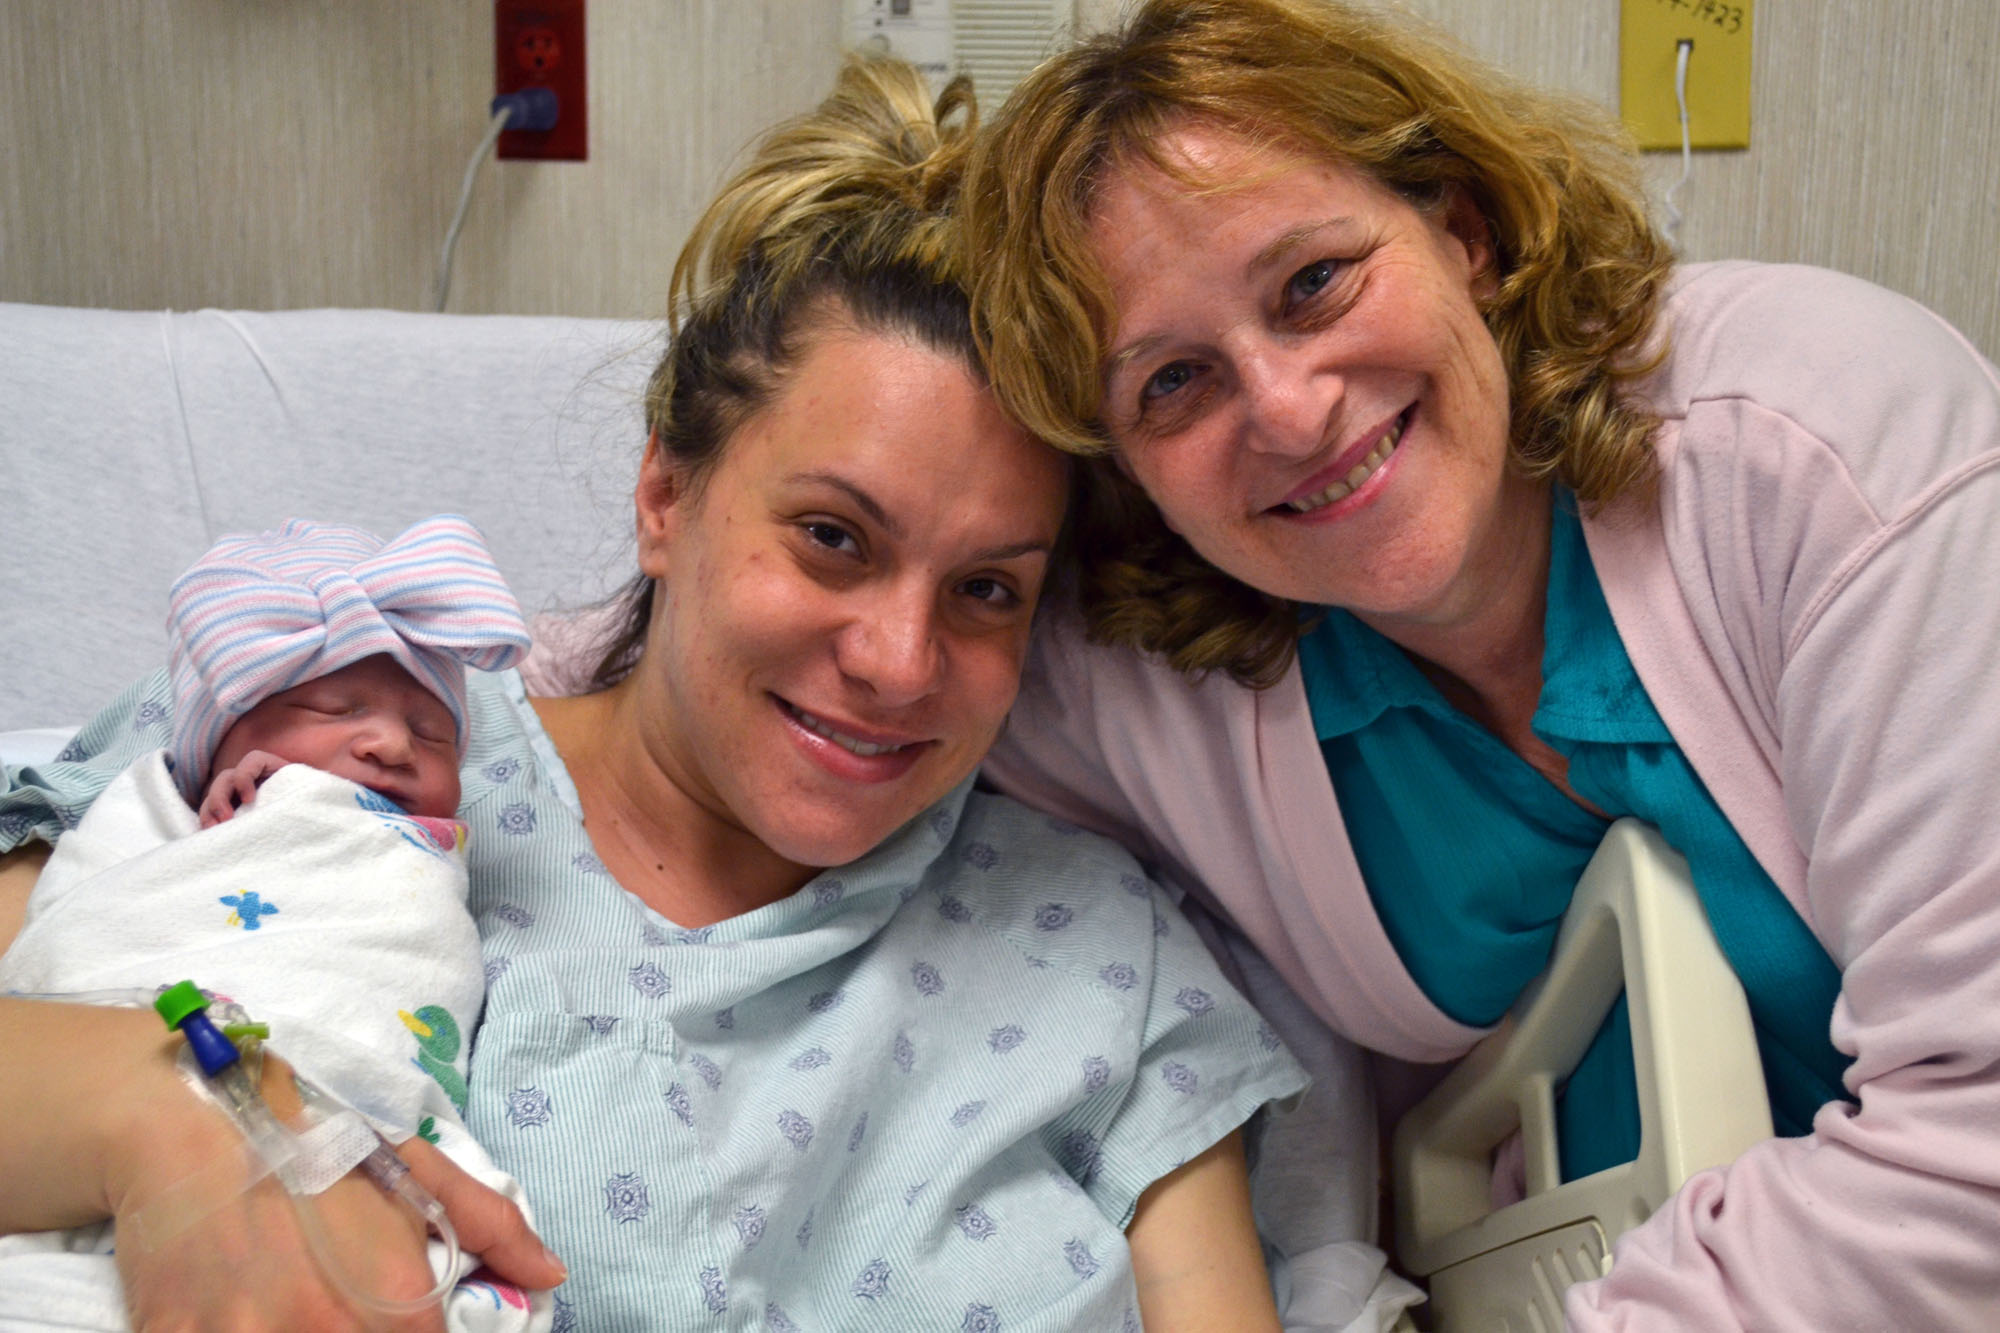 New mother and first baby girl born at BHCS. Tamara Argov Replogle gives birth in the same hospital her mother Sharon Argov gave birth 29 years earlier. 